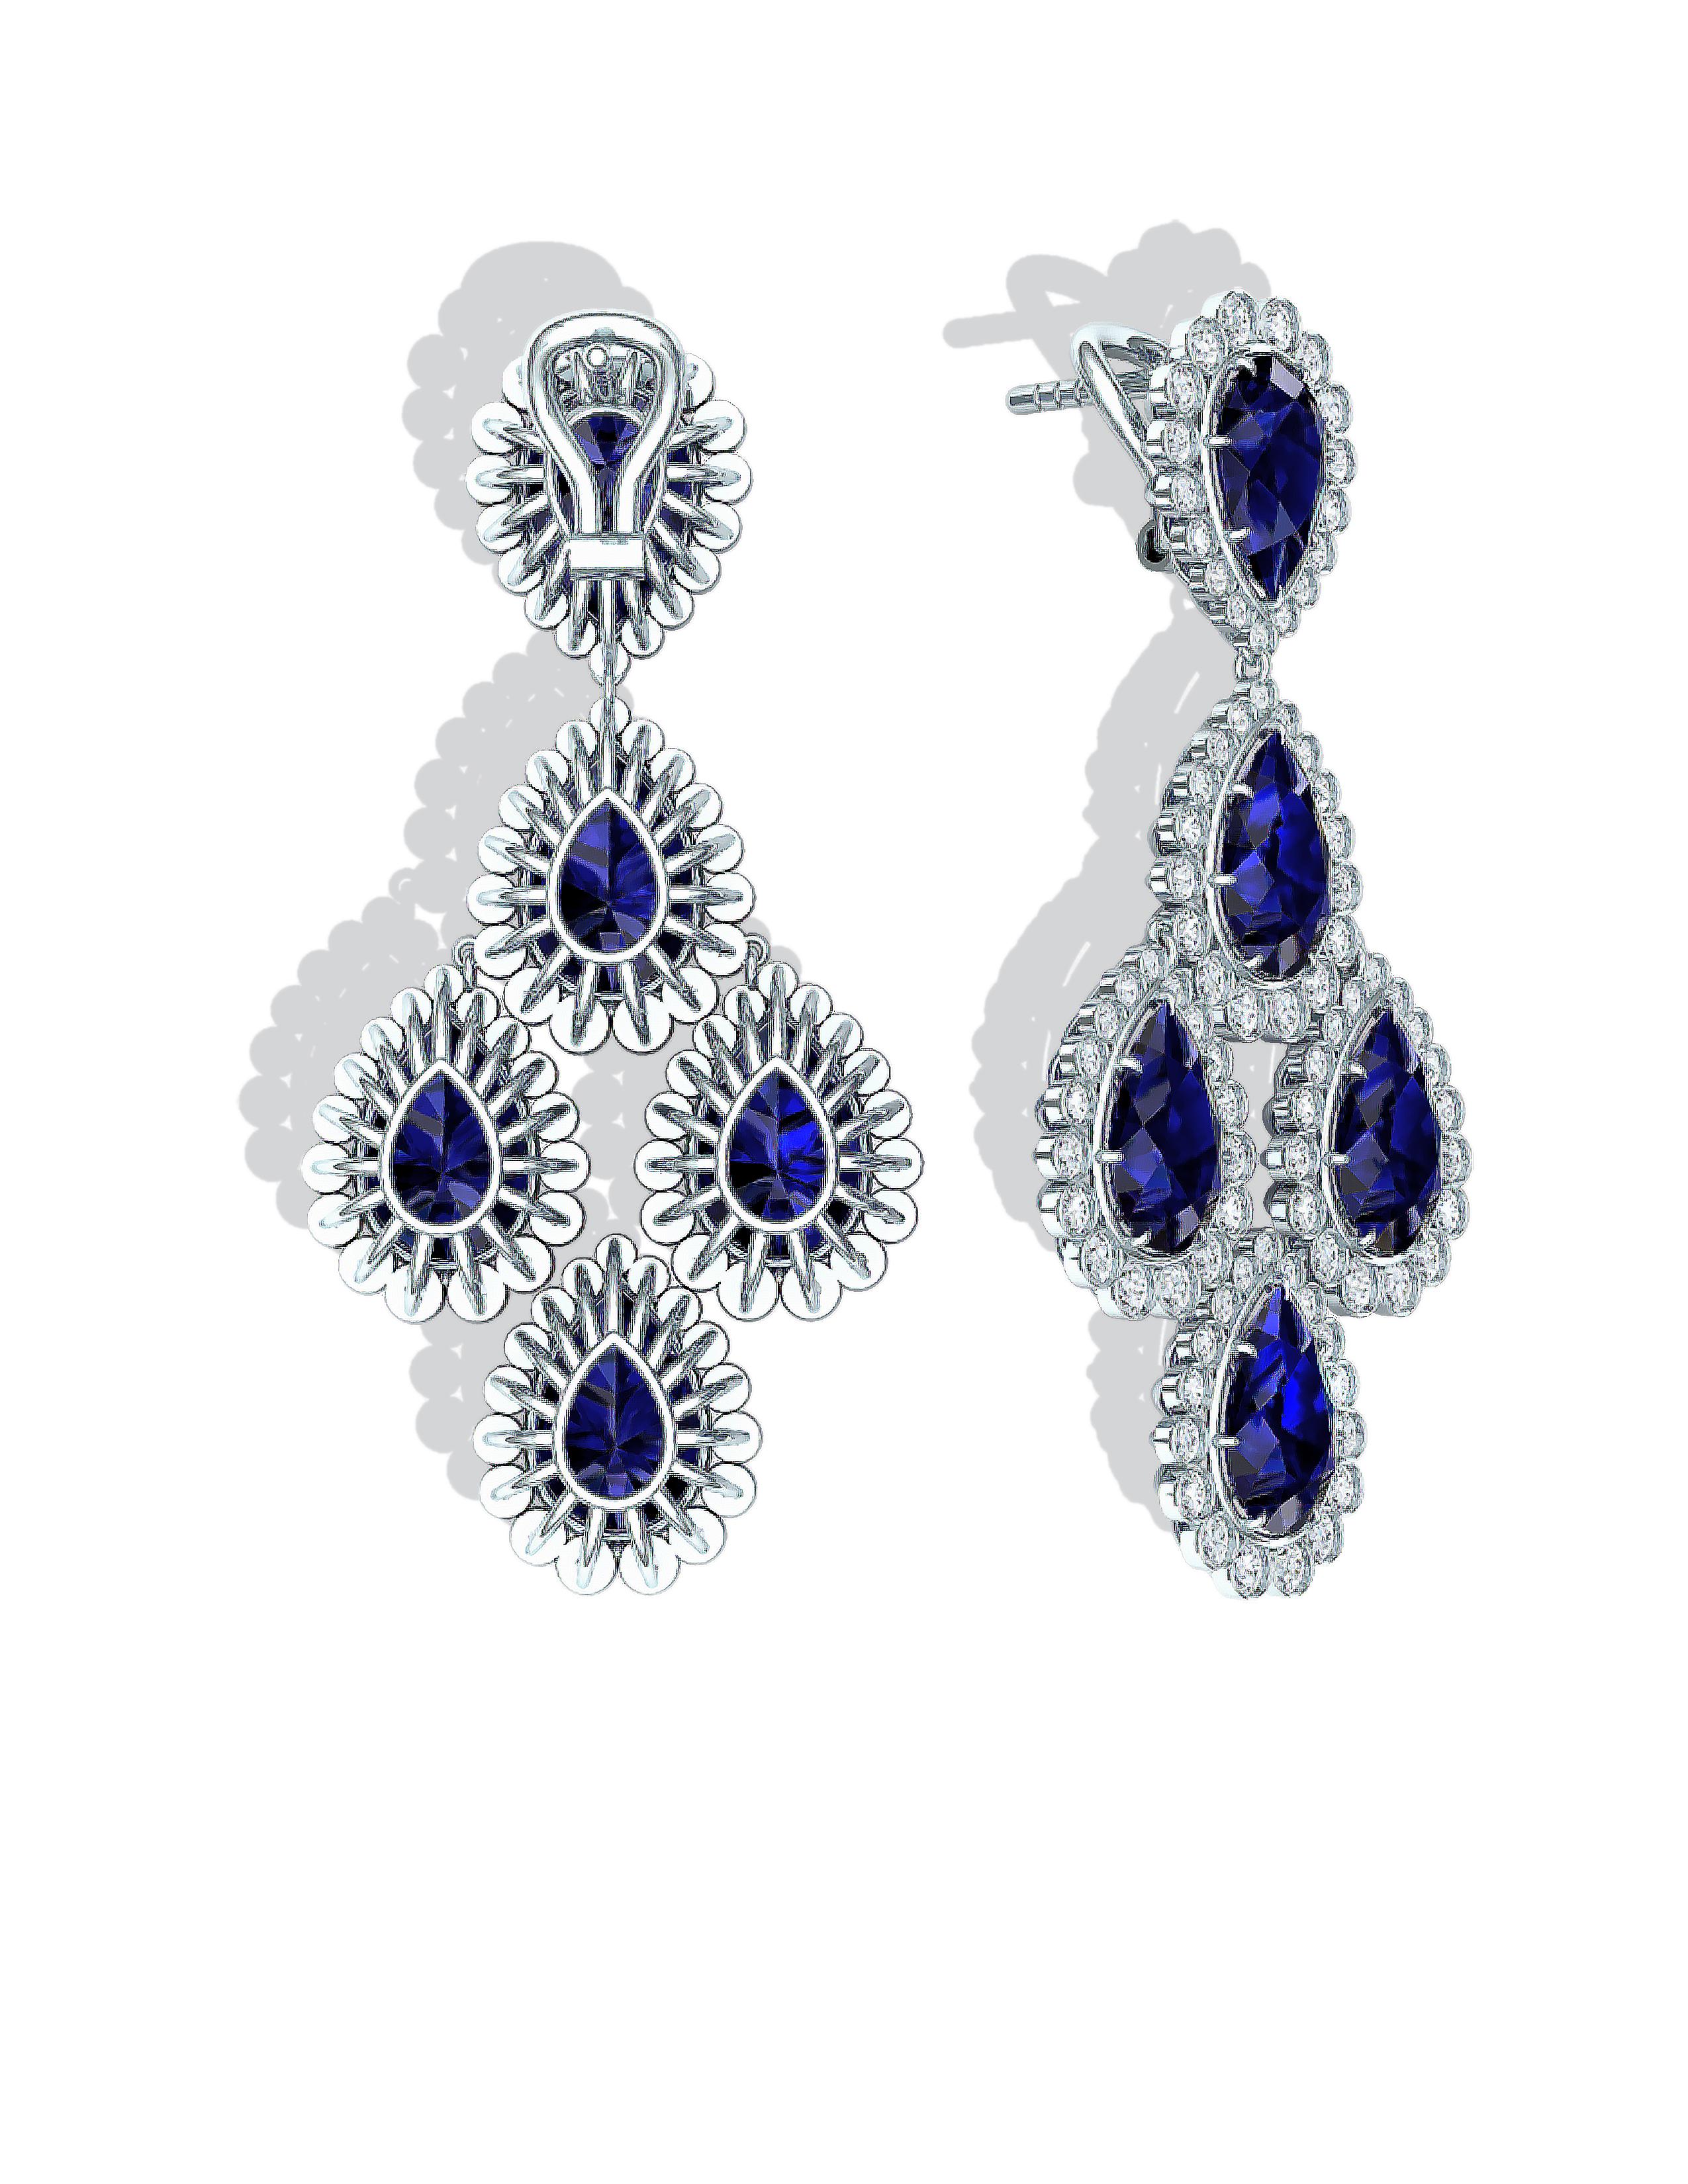 A stunning ensemble of deep blue rich sapphire lines with crisp white diamonds can be seen in this timeless pair of earrings.  These earrings are comprised of over 4 carats of natural unheated sapphires.  These sapphires are lined with handset round